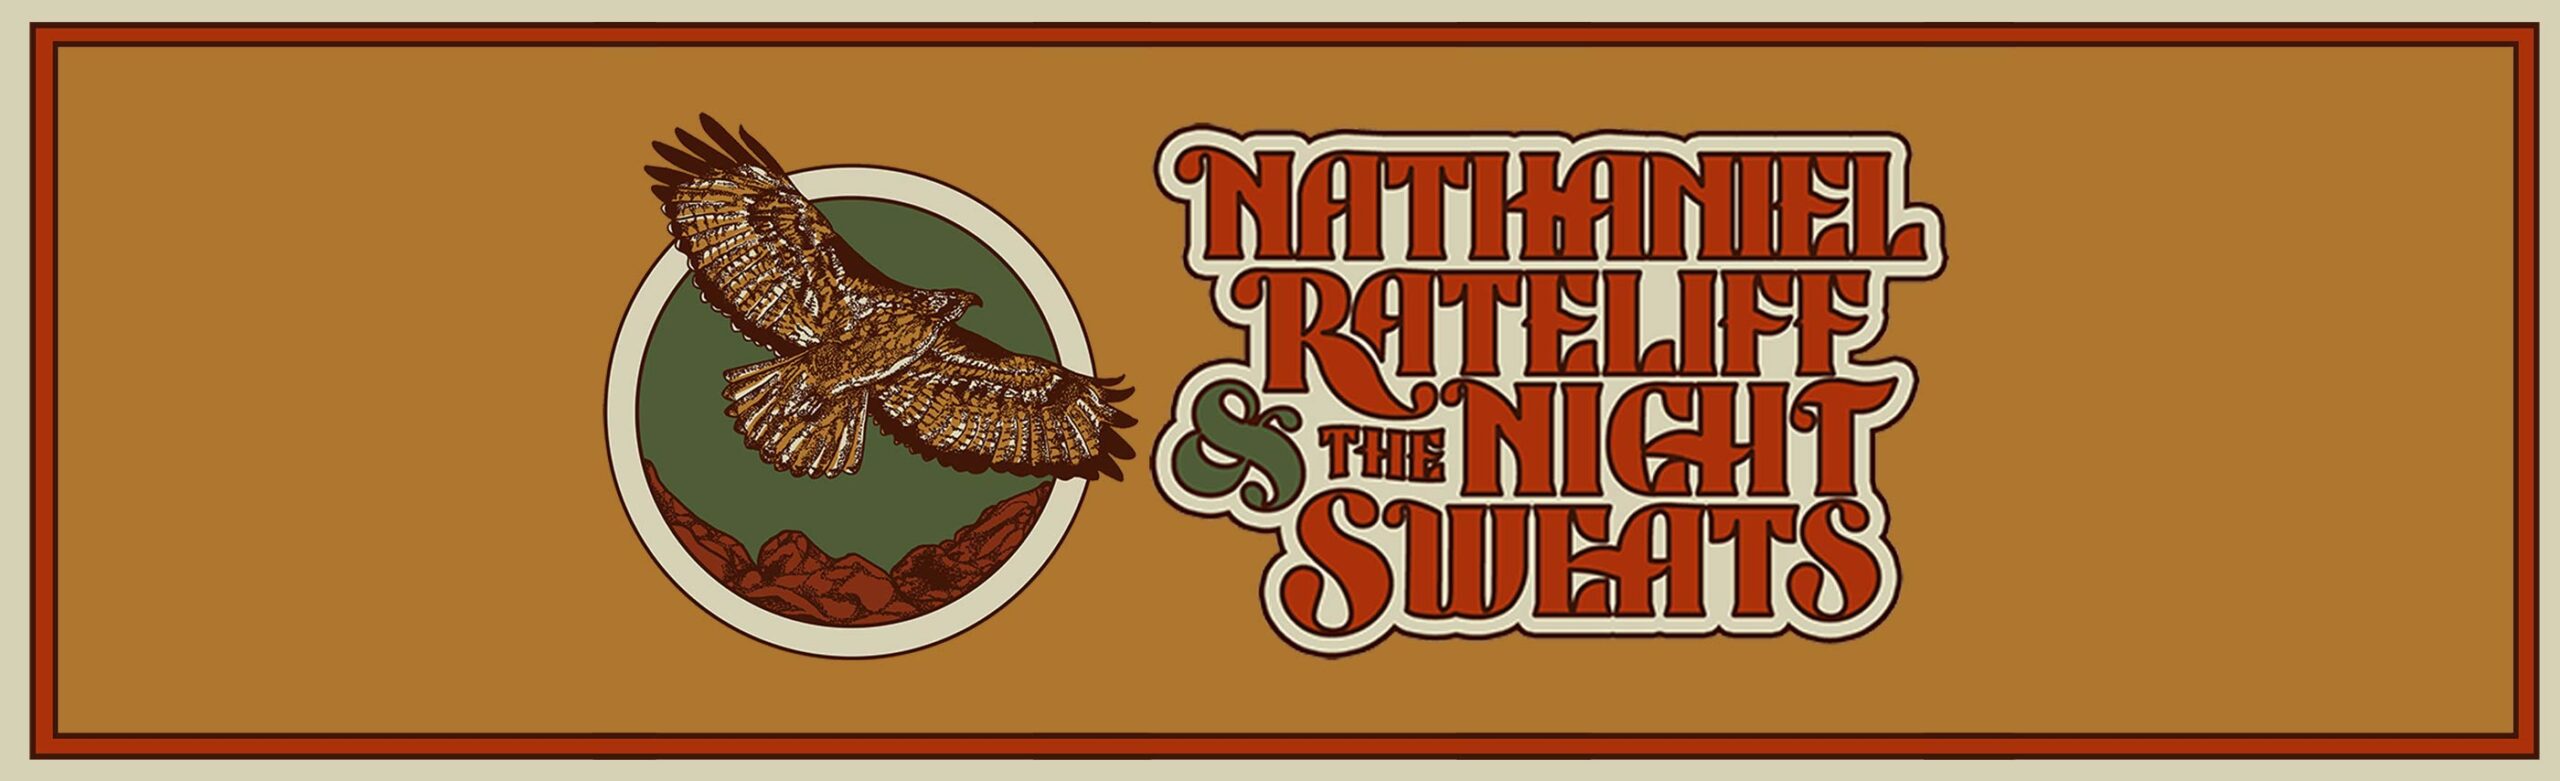 Nathaniel Rateliff & The Night Sweats Announce Two Nights at KettleHouse Amphitheater with Waxahatchee Image